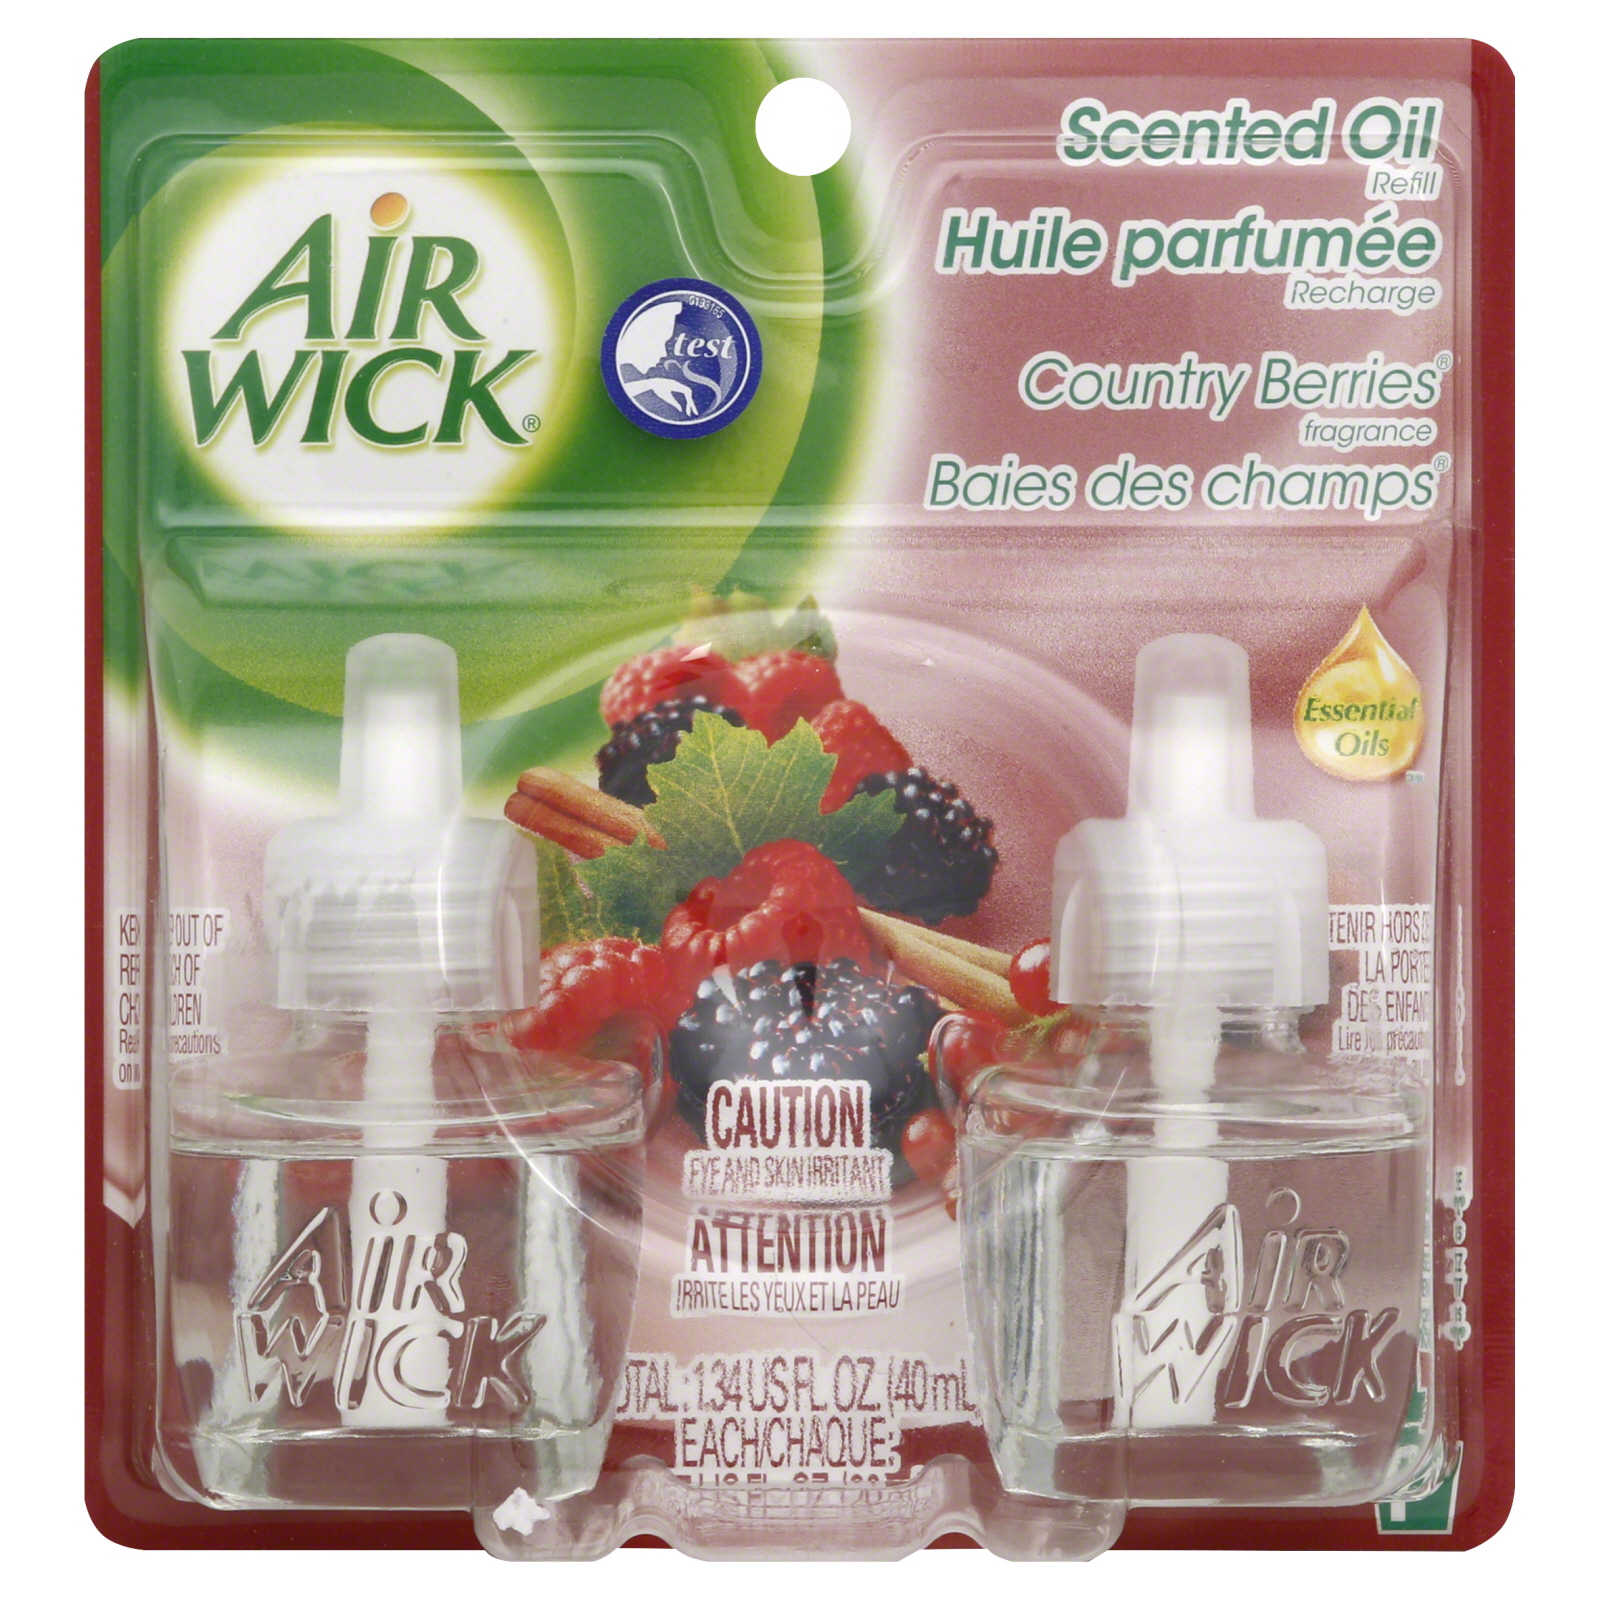 Airwick Oil Refills, Country Berries Scented, Value Pack, 2 -0.71 fl oz (21 ml) refills [1.42 fl oz (42 ml)]